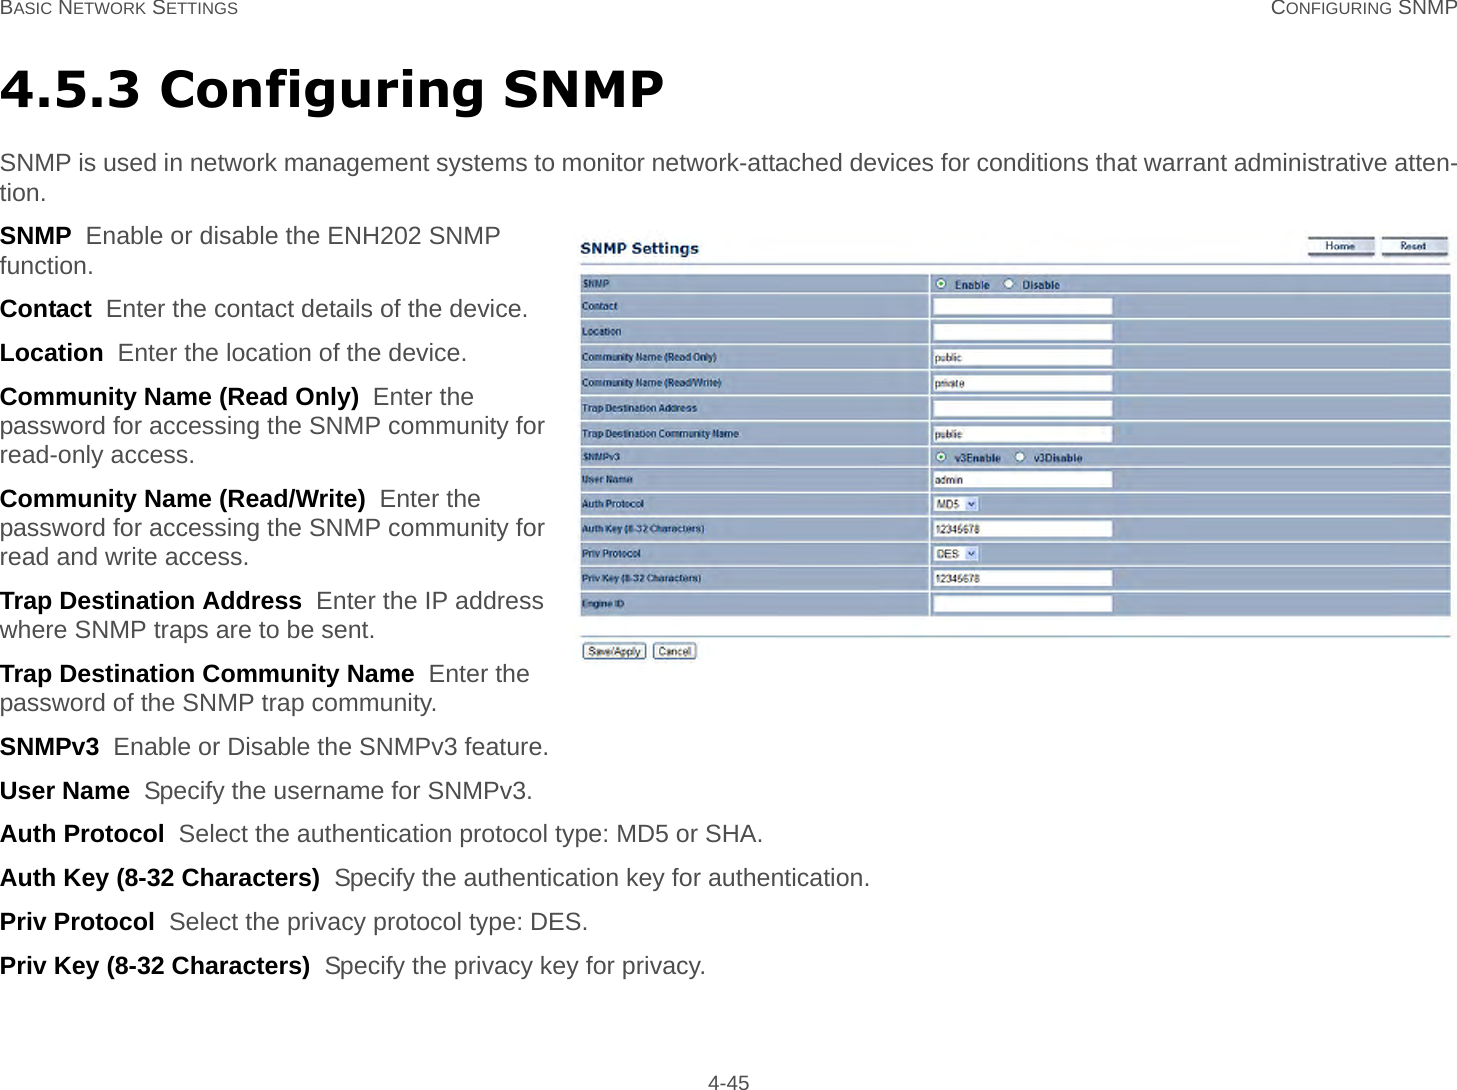 BASIC NETWORK SETTINGS CONFIGURING SNMP 4-454.5.3 Configuring SNMPSNMP is used in network management systems to monitor network-attached devices for conditions that warrant administrative atten-tion.SNMP  Enable or disable the ENH202 SNMP function.Contact  Enter the contact details of the device.Location  Enter the location of the device.Community Name (Read Only)  Enter the password for accessing the SNMP community for read-only access.Community Name (Read/Write)  Enter the password for accessing the SNMP community for read and write access.Trap Destination Address  Enter the IP address where SNMP traps are to be sent.Trap Destination Community Name  Enter the password of the SNMP trap community.SNMPv3  Enable or Disable the SNMPv3 feature.User Name  Specify the username for SNMPv3.Auth Protocol  Select the authentication protocol type: MD5 or SHA.Auth Key (8-32 Characters)  Specify the authentication key for authentication.Priv Protocol  Select the privacy protocol type: DES.Priv Key (8-32 Characters)  Specify the privacy key for privacy.